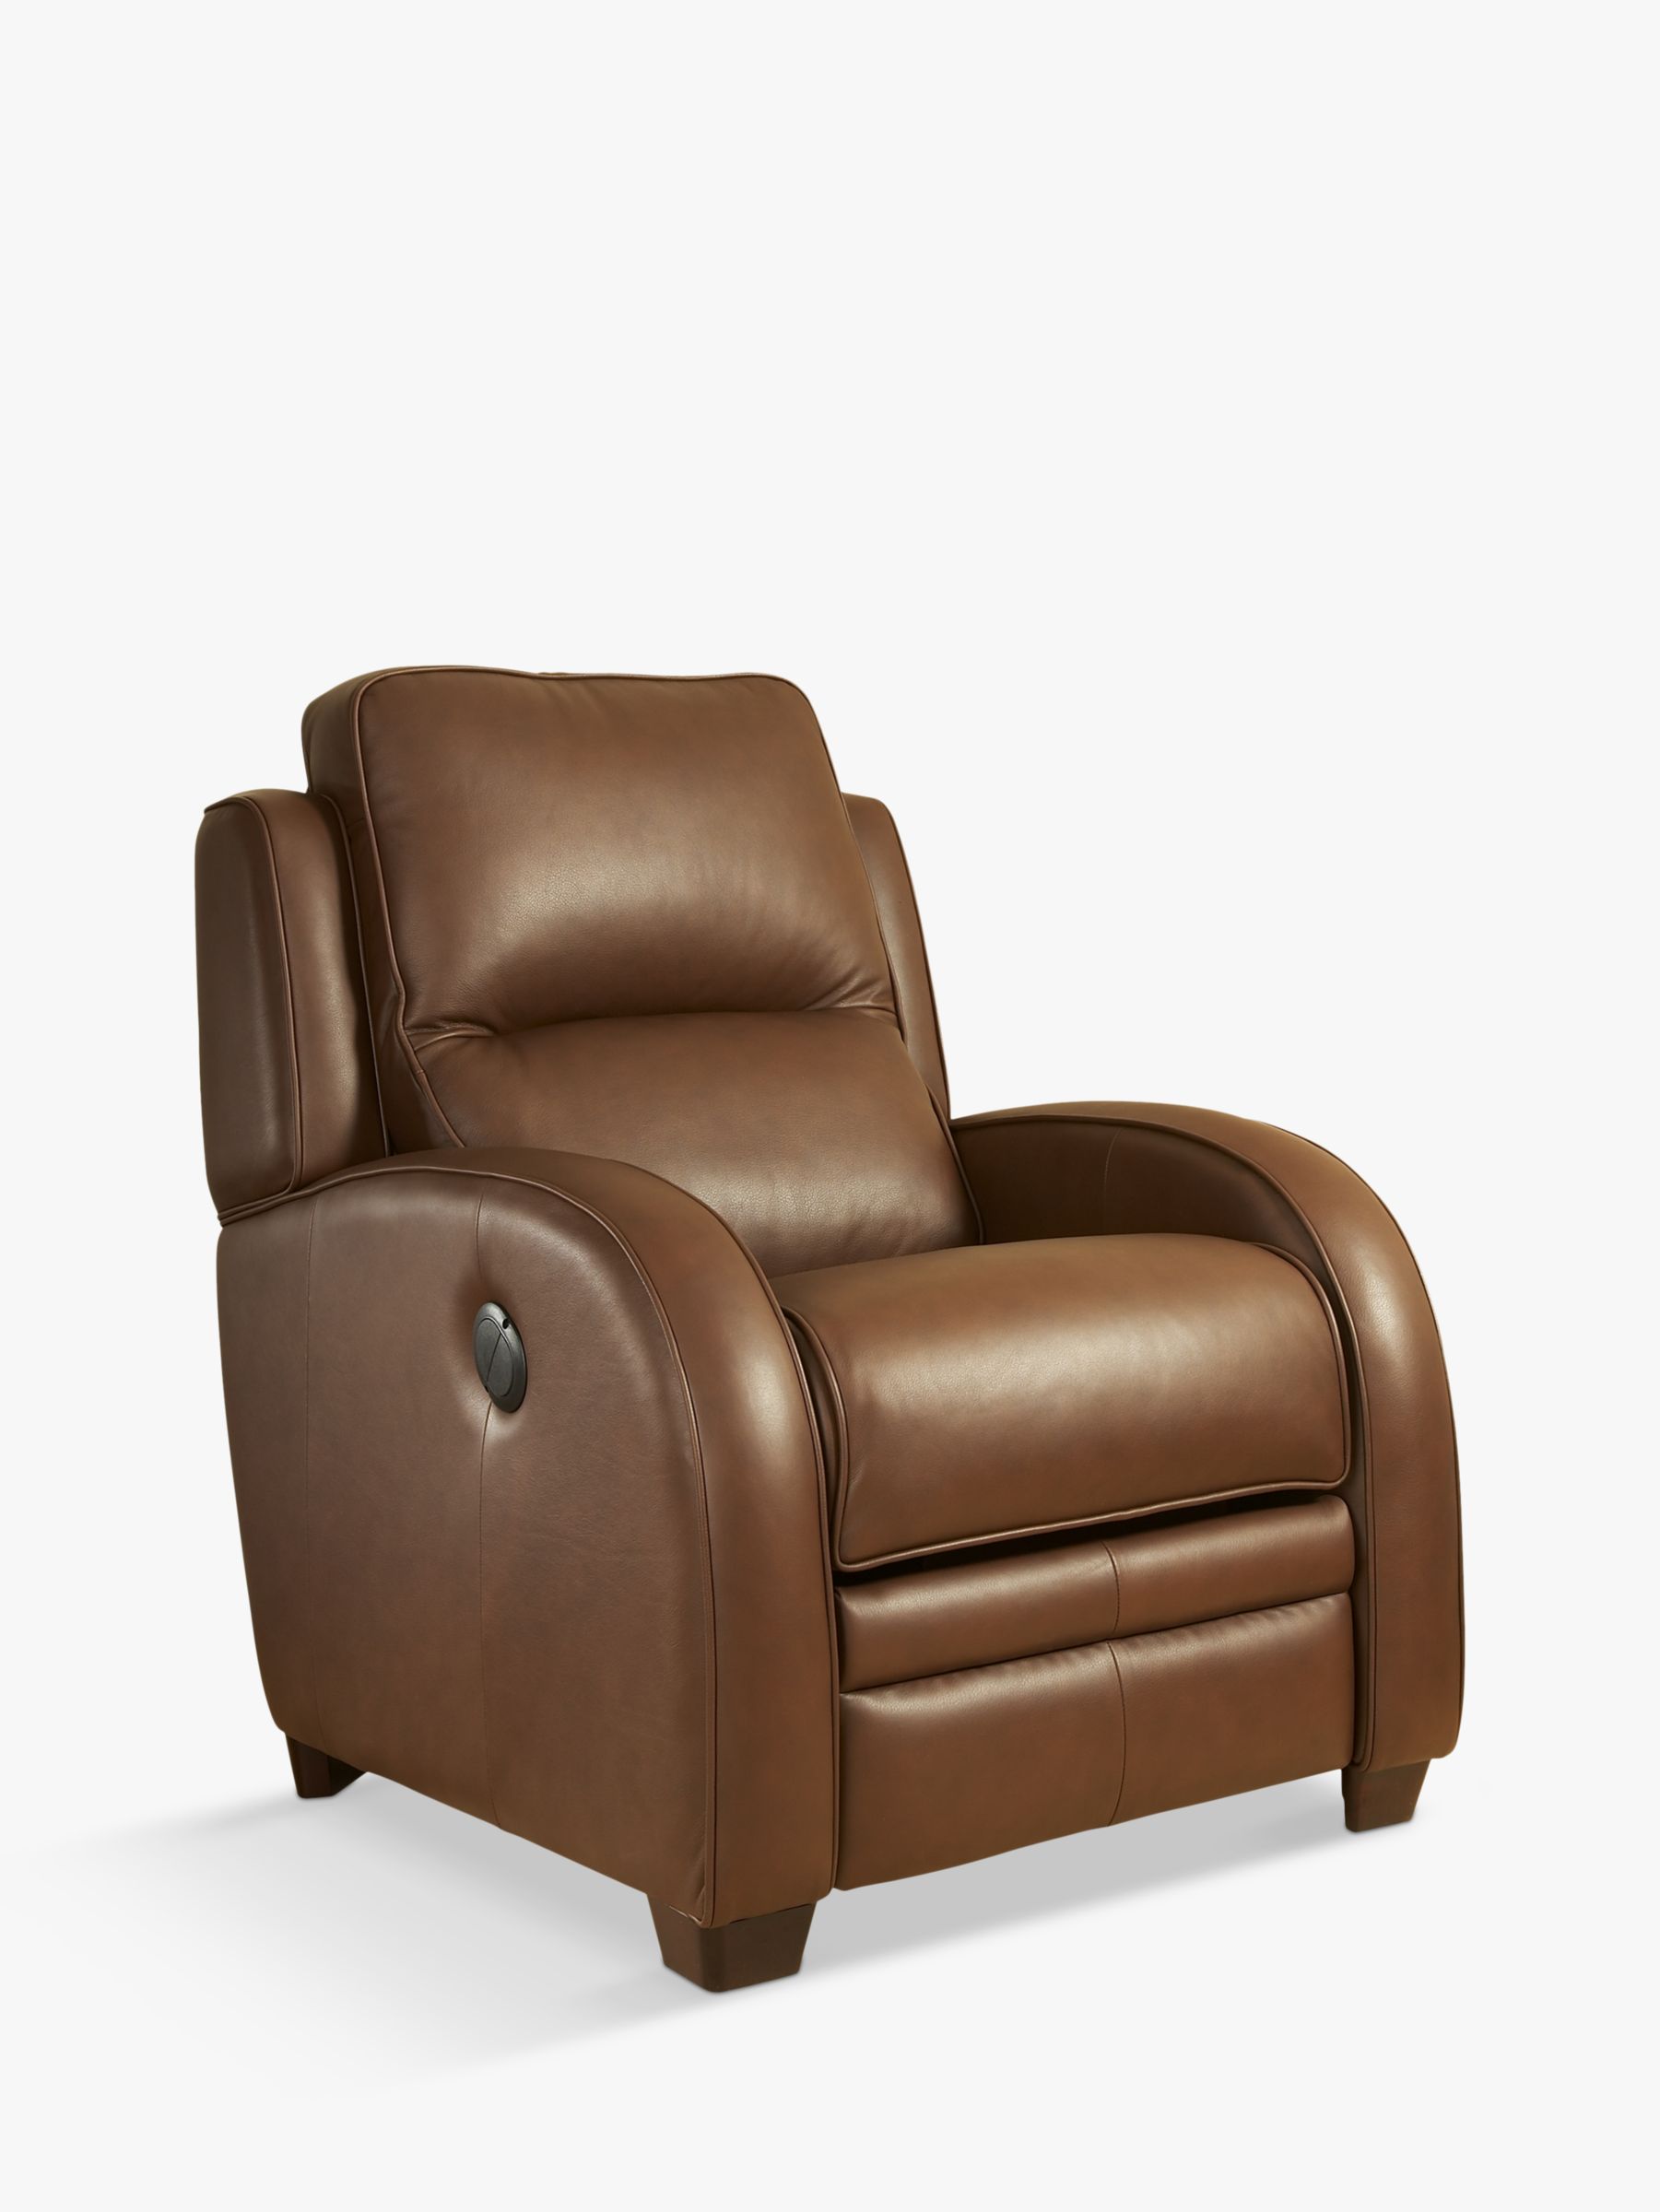 Power Recliner Leather Armchair, Tan Leather Recliner Chair